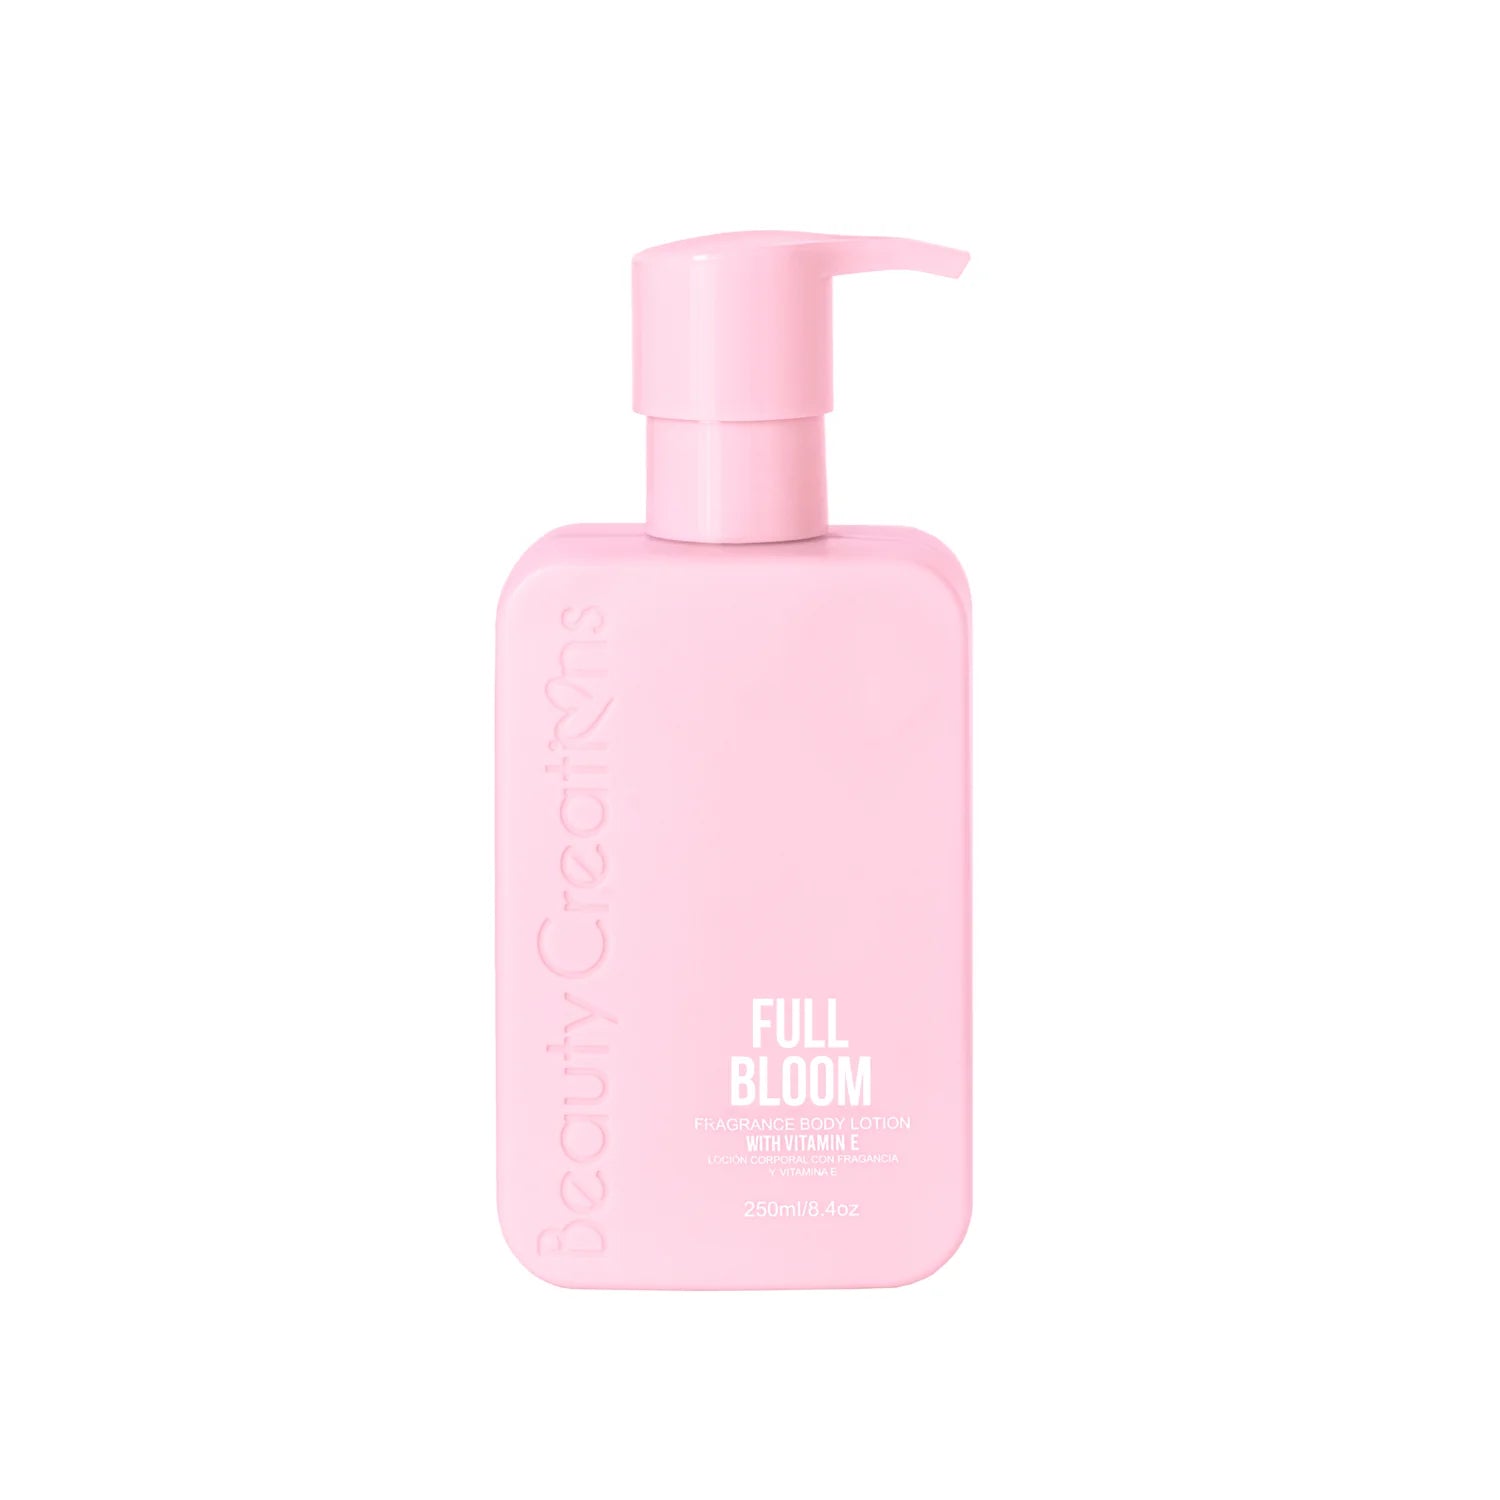 Beauty Creations - Body Lotion Full Bloom